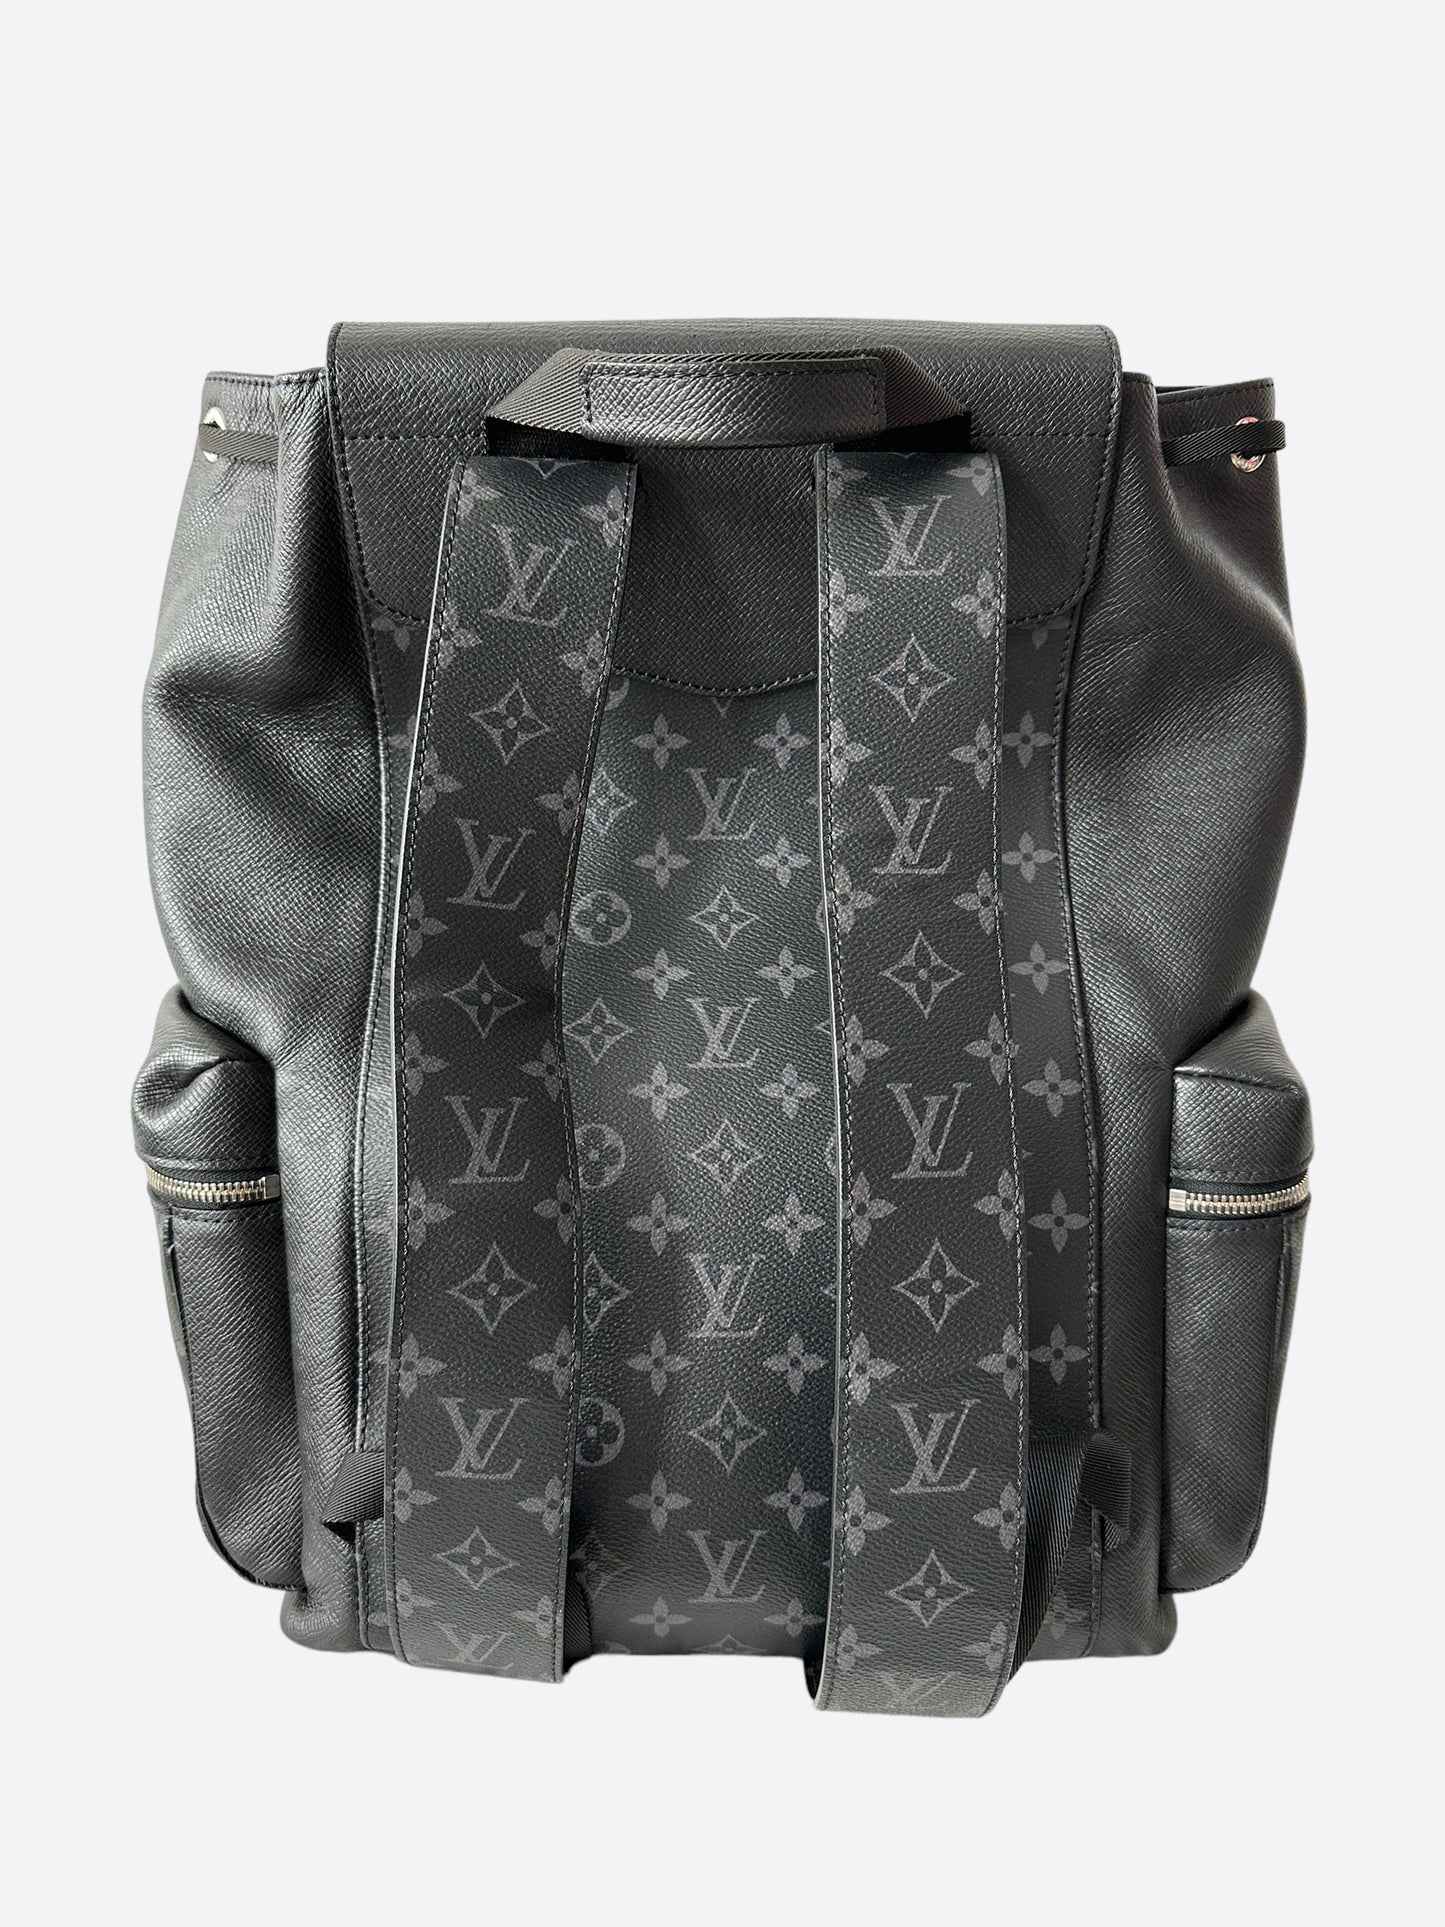 backpack trio louis vuittons